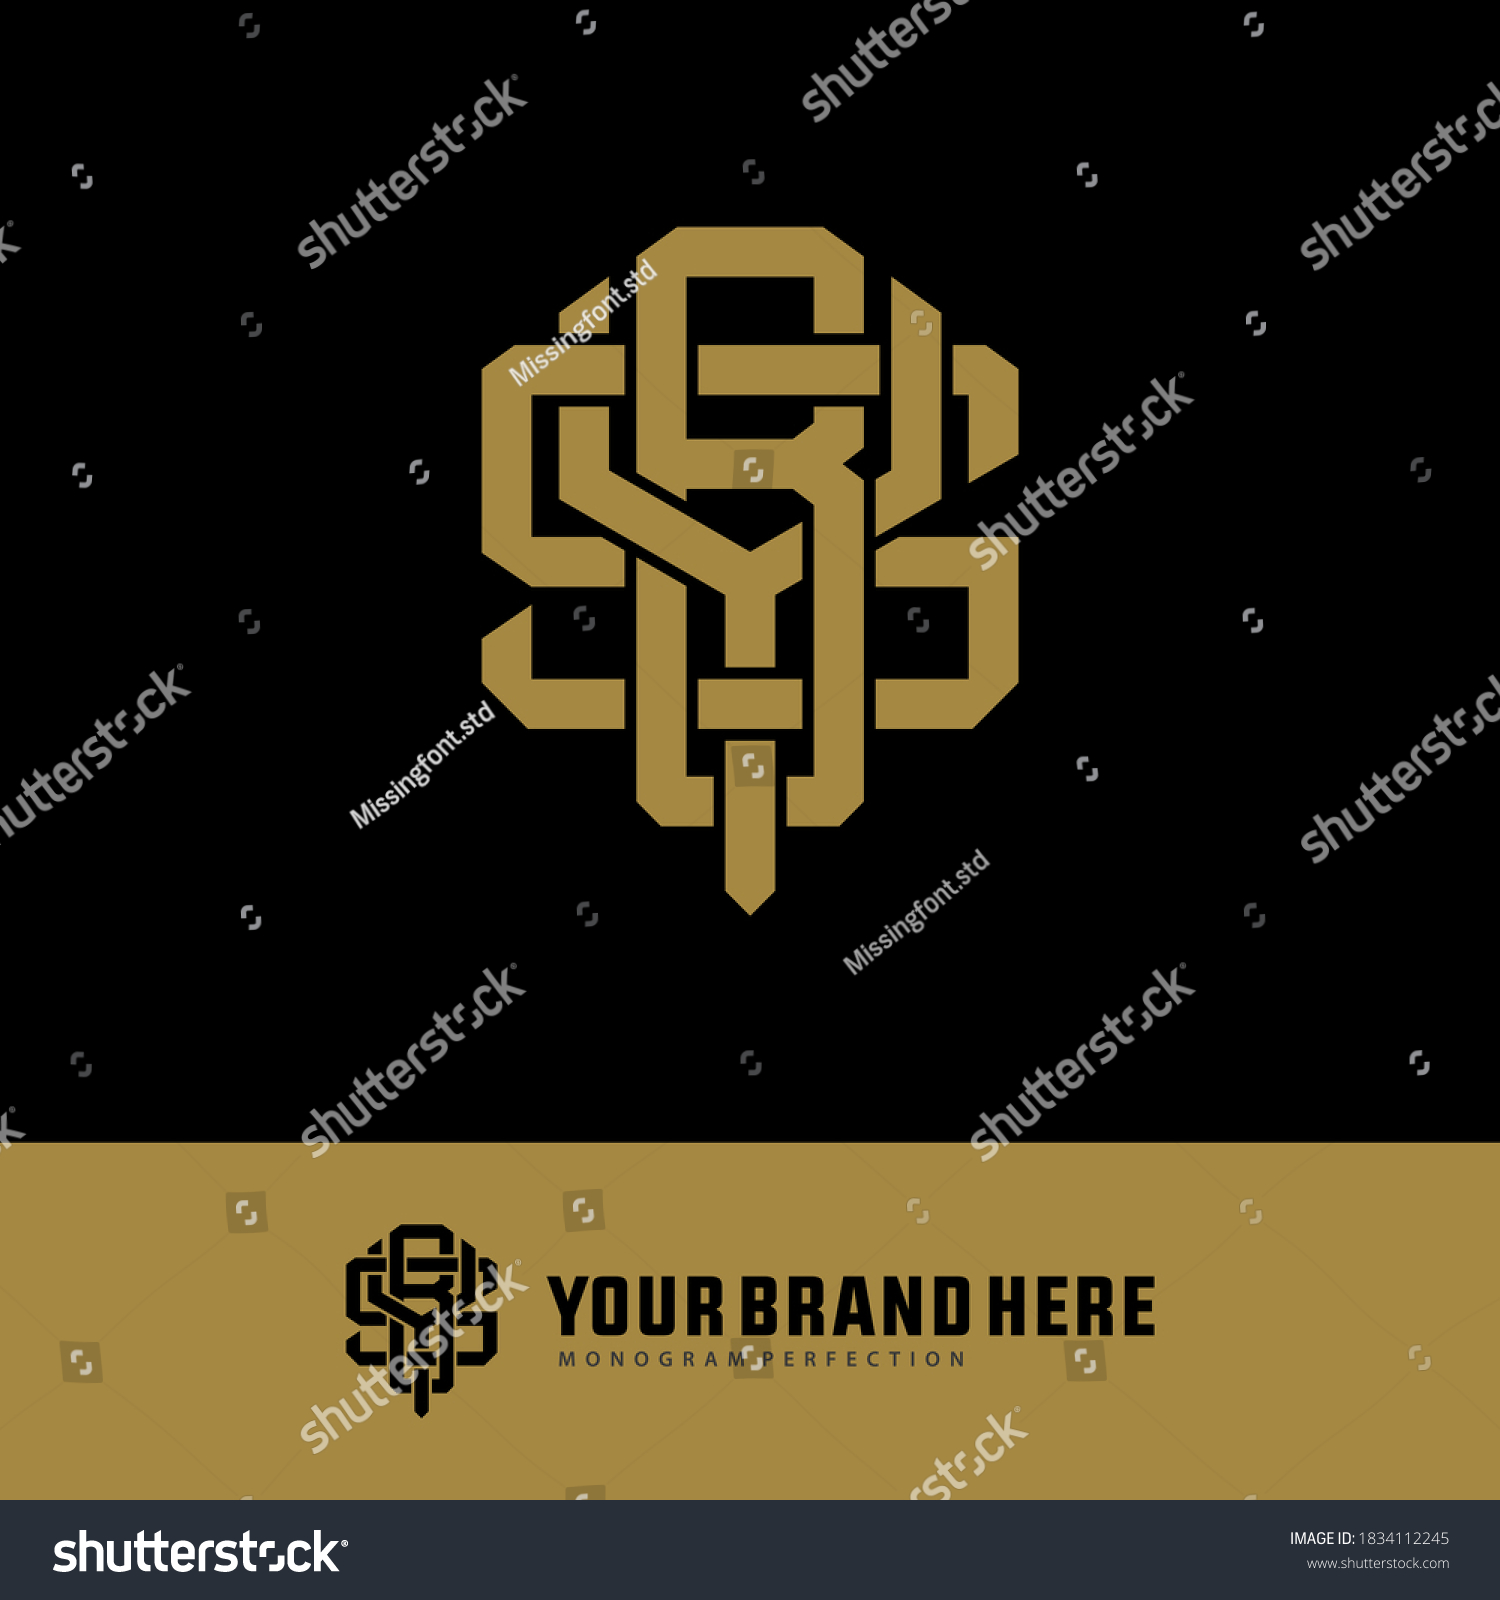 SVG of Initial letter Y, B, S, YBS, YSB, BSY, BYS, SYB or SBY overlapping, interlock, monogram logo, gold color on black background svg